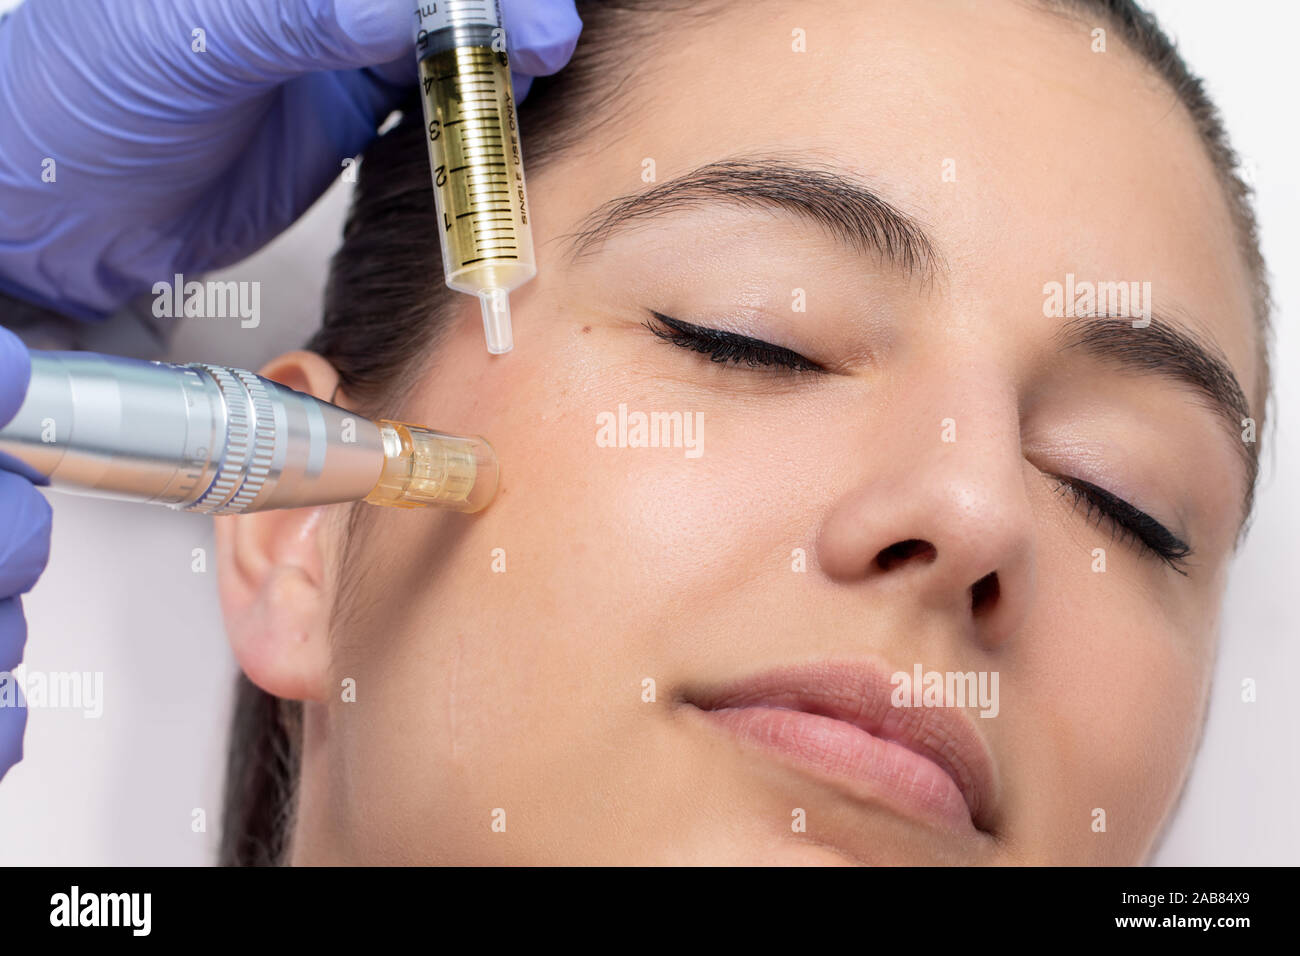 Close up of young woman having cosmetic mesotherapy facial. Therapist injecting pharmaceuticals with derma pen on cheek. Stock Photo